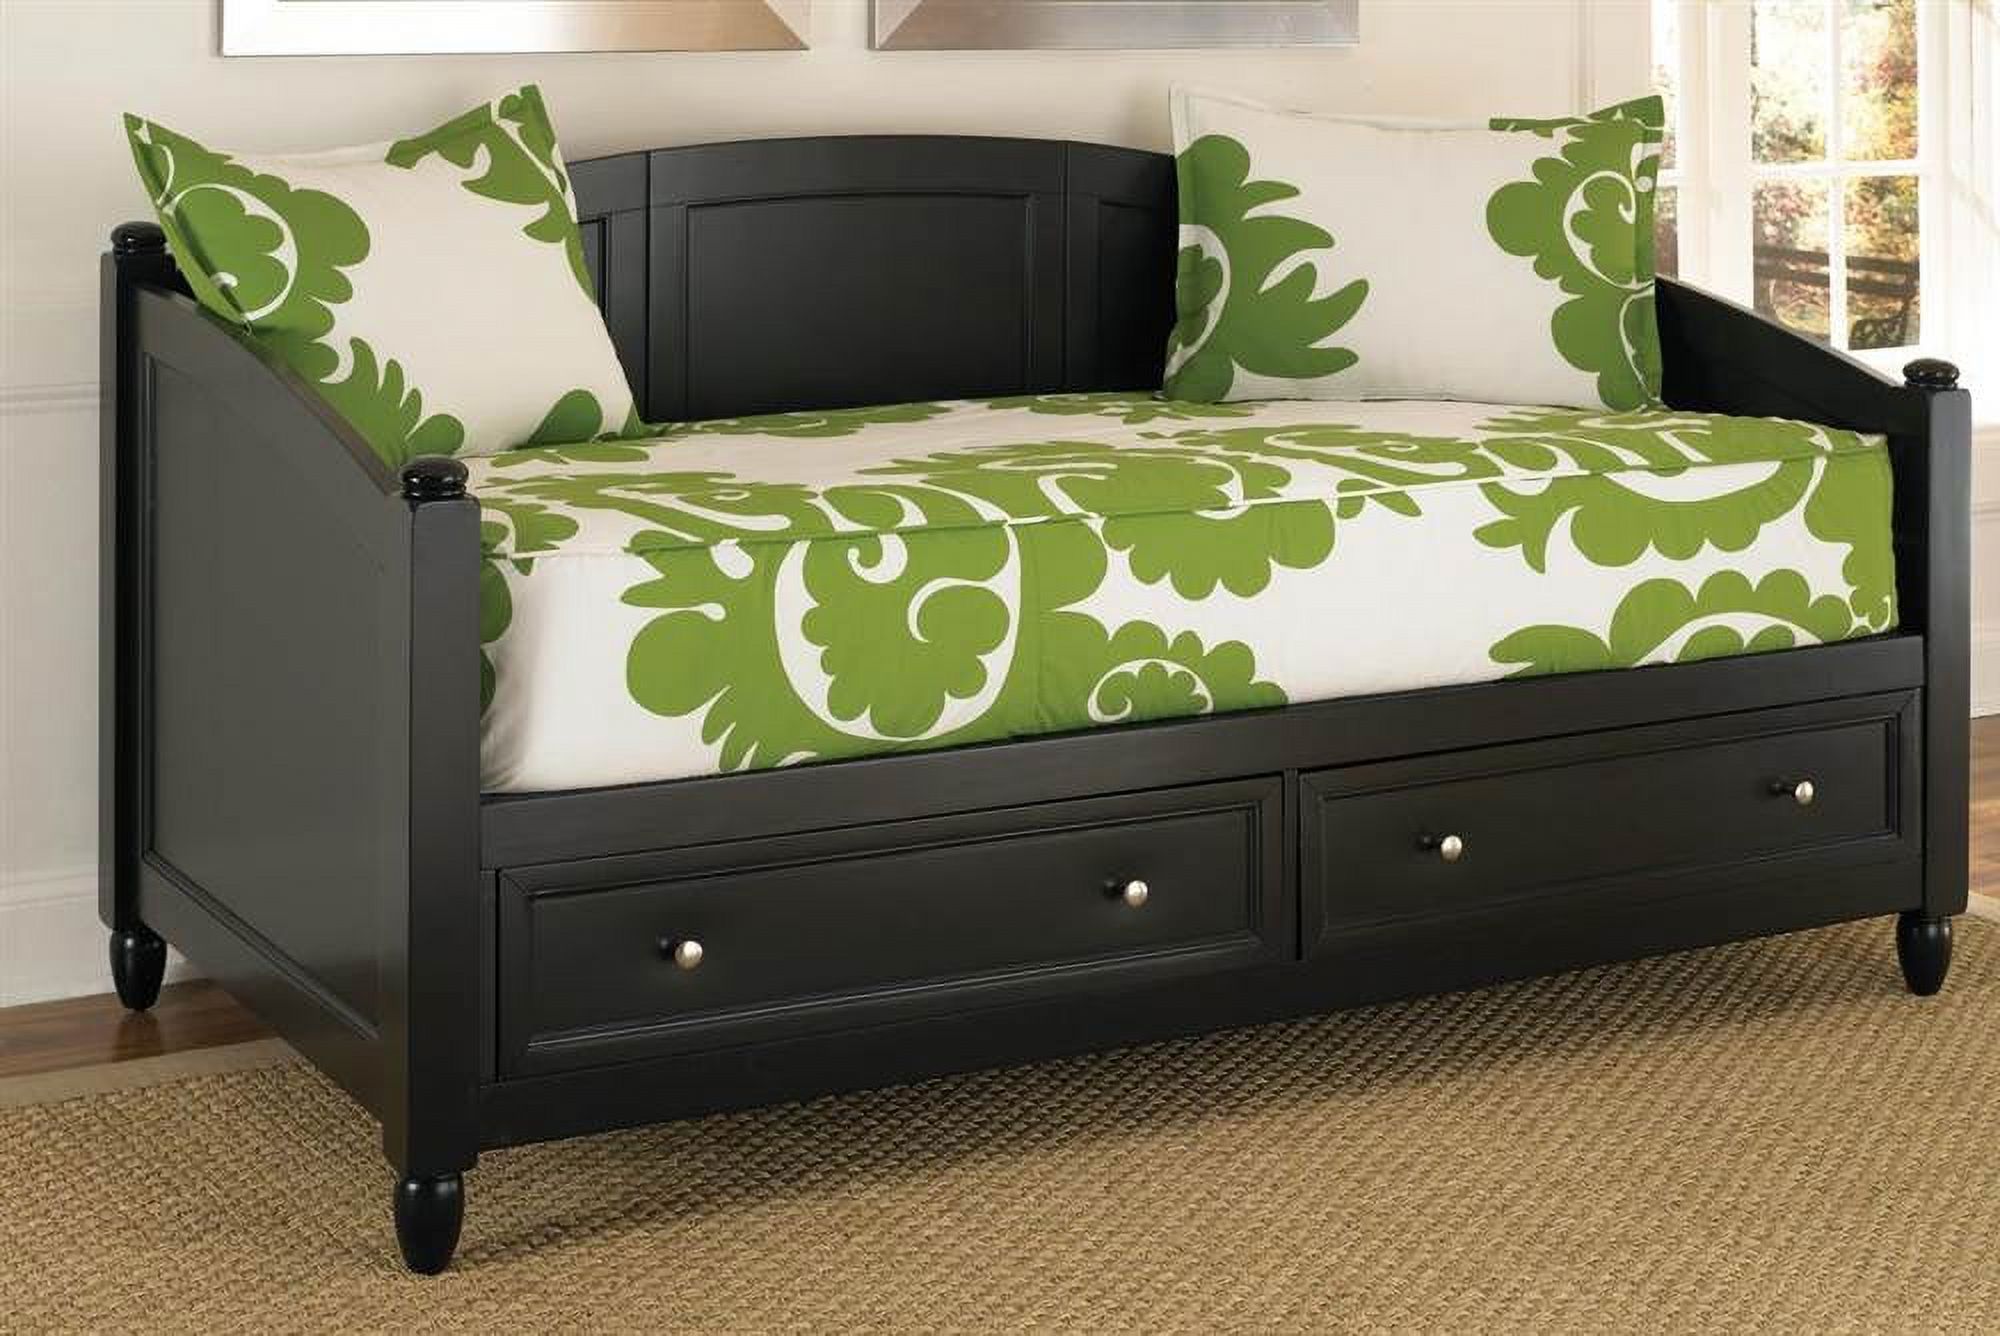 2-Drawer Daybed in Black Finish - image 1 of 3